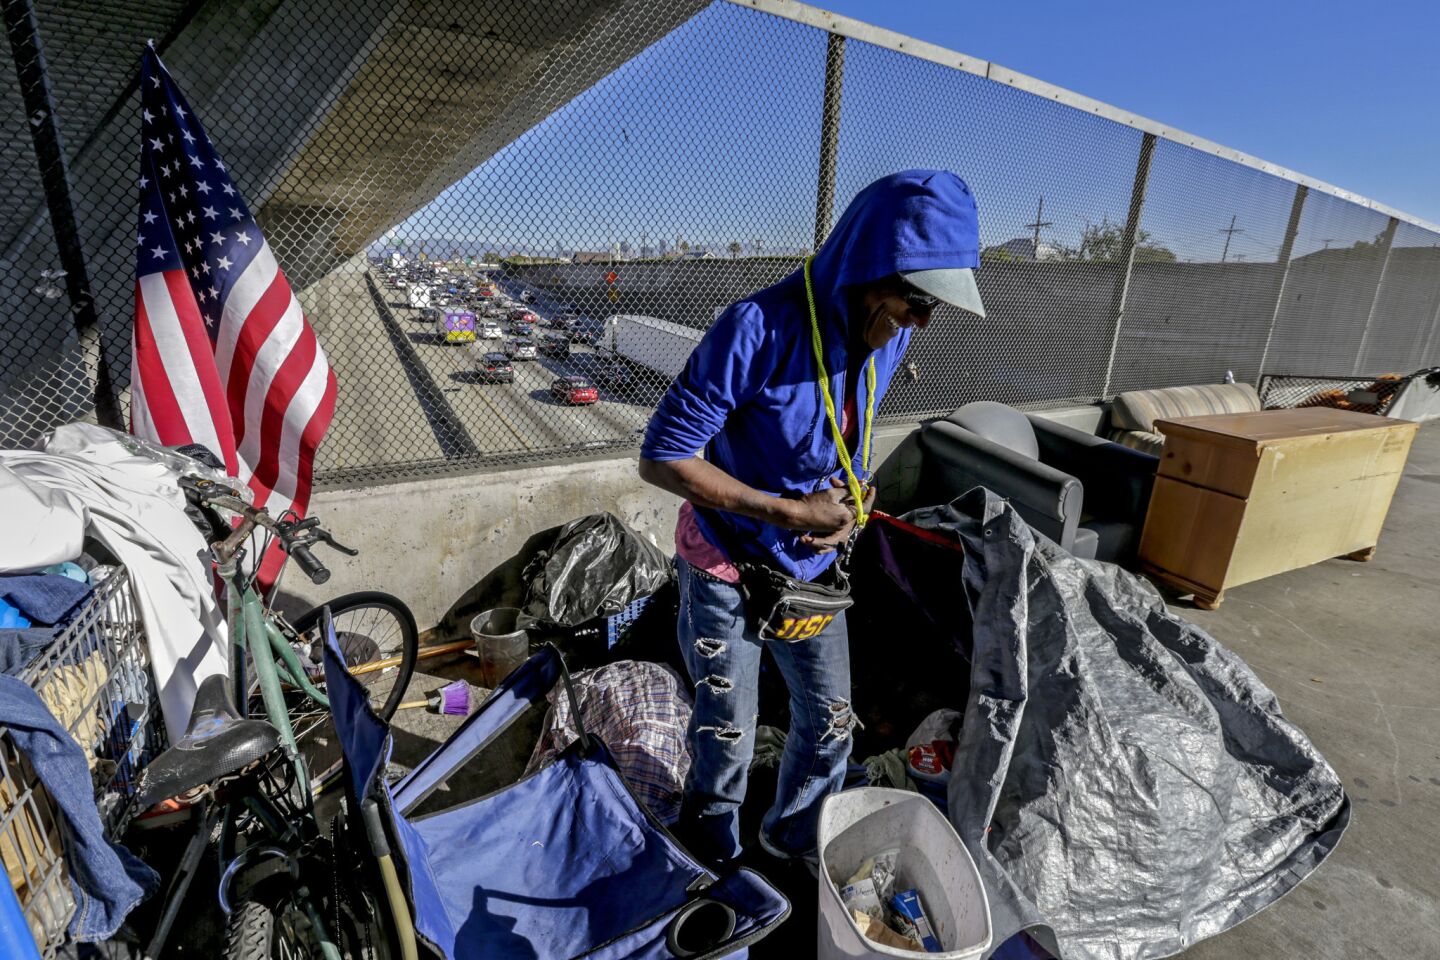 Alice Myles, 60, who is homeless, steps out of her tent pitched over 42nd. Street bridge over 110 Freeway in Los Angles.